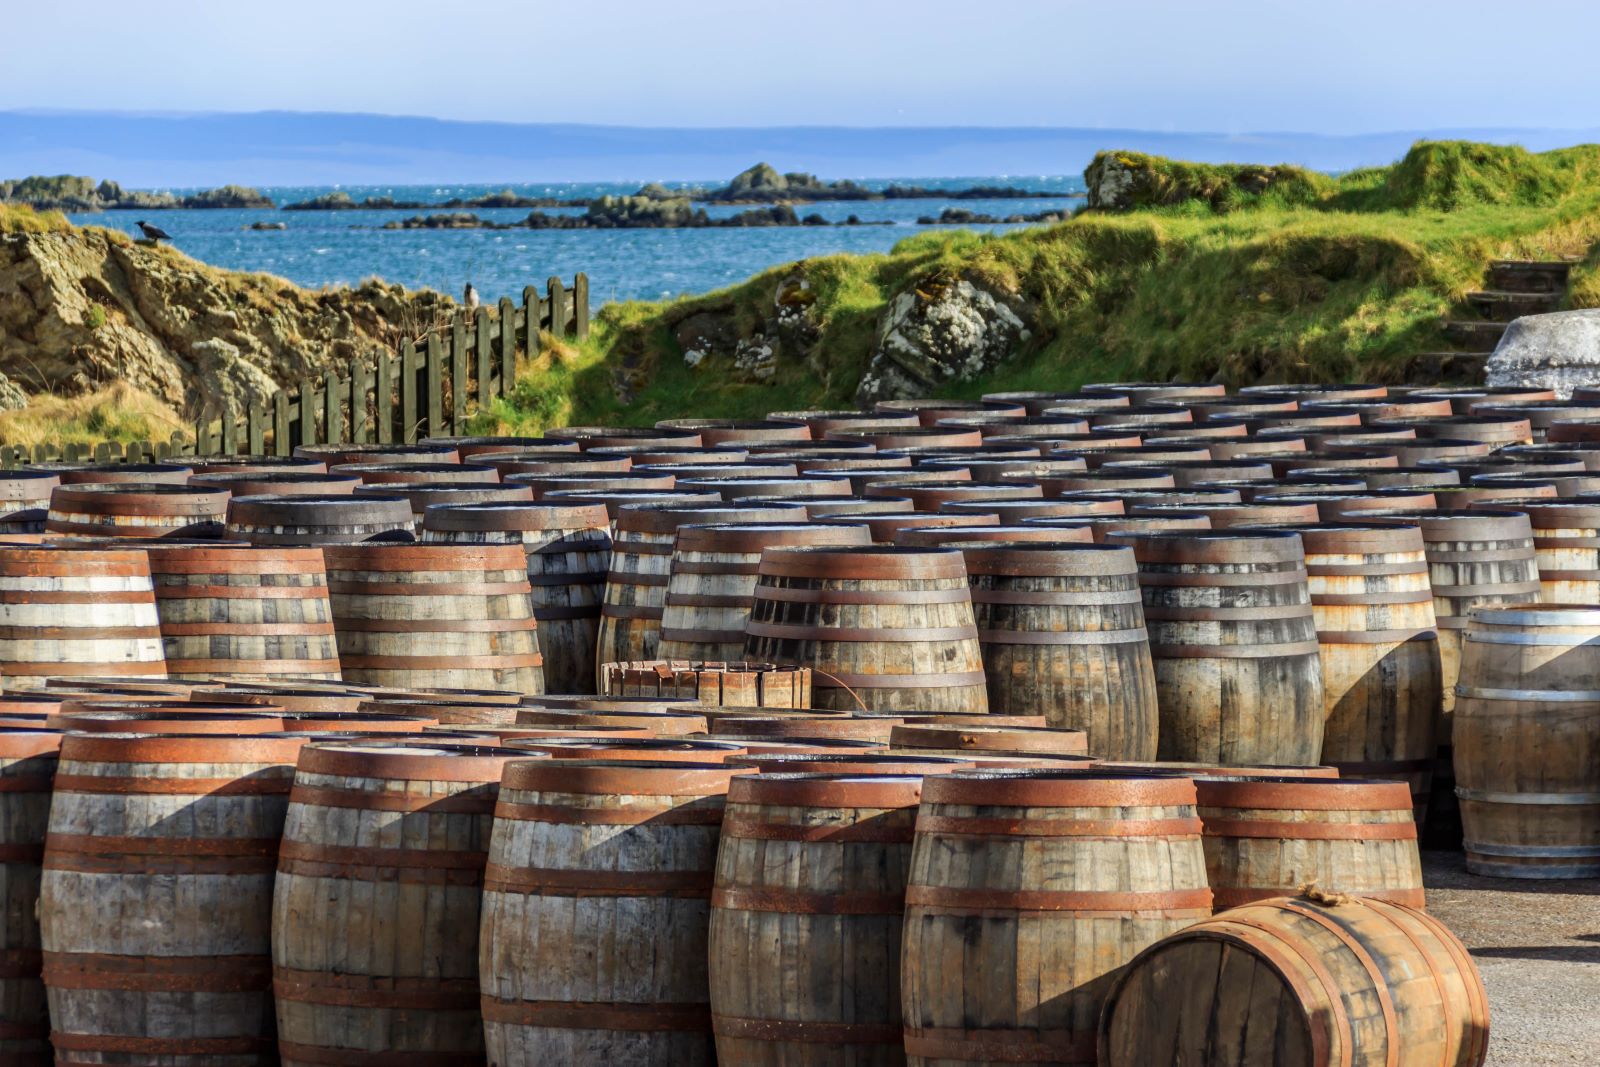 <p class="wp-caption-text">Image Credit: Shutterstock / Rebecca_RCP</p>  <p><span>Known for its peaty single malt whiskies, Islay is home to legendary distilleries like Laphroaig and Ardbeg. A visit here is a pilgrimage for lovers of smoky flavors.</span></p>